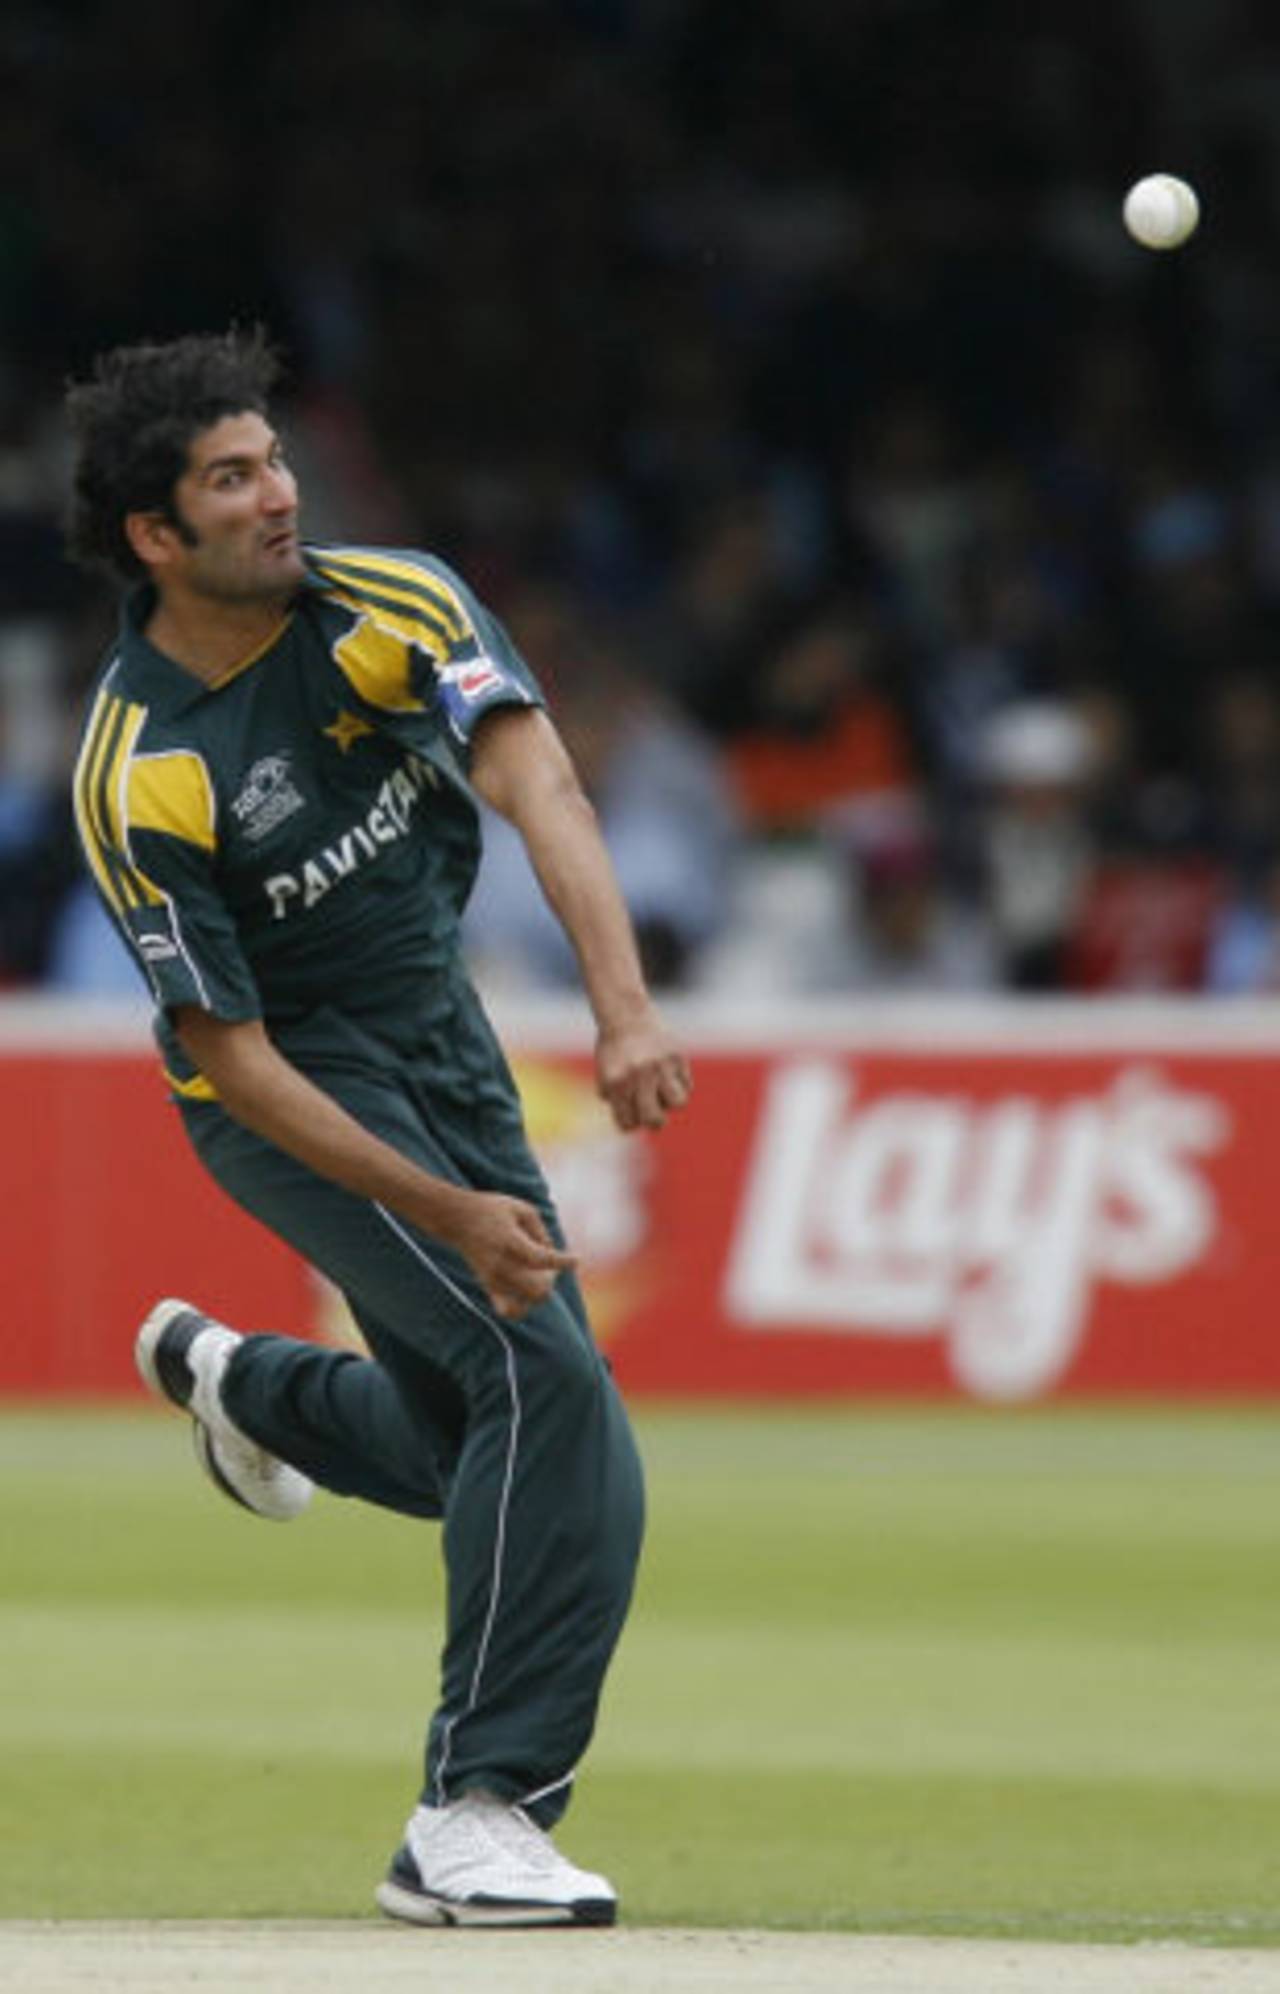 Sohail Tanvir, who was integral to the Rajasthan Royals' victory run in IPL 2008, is one of 66 players who will go under the hammer in the new auction&nbsp;&nbsp;&bull;&nbsp;&nbsp;AFP